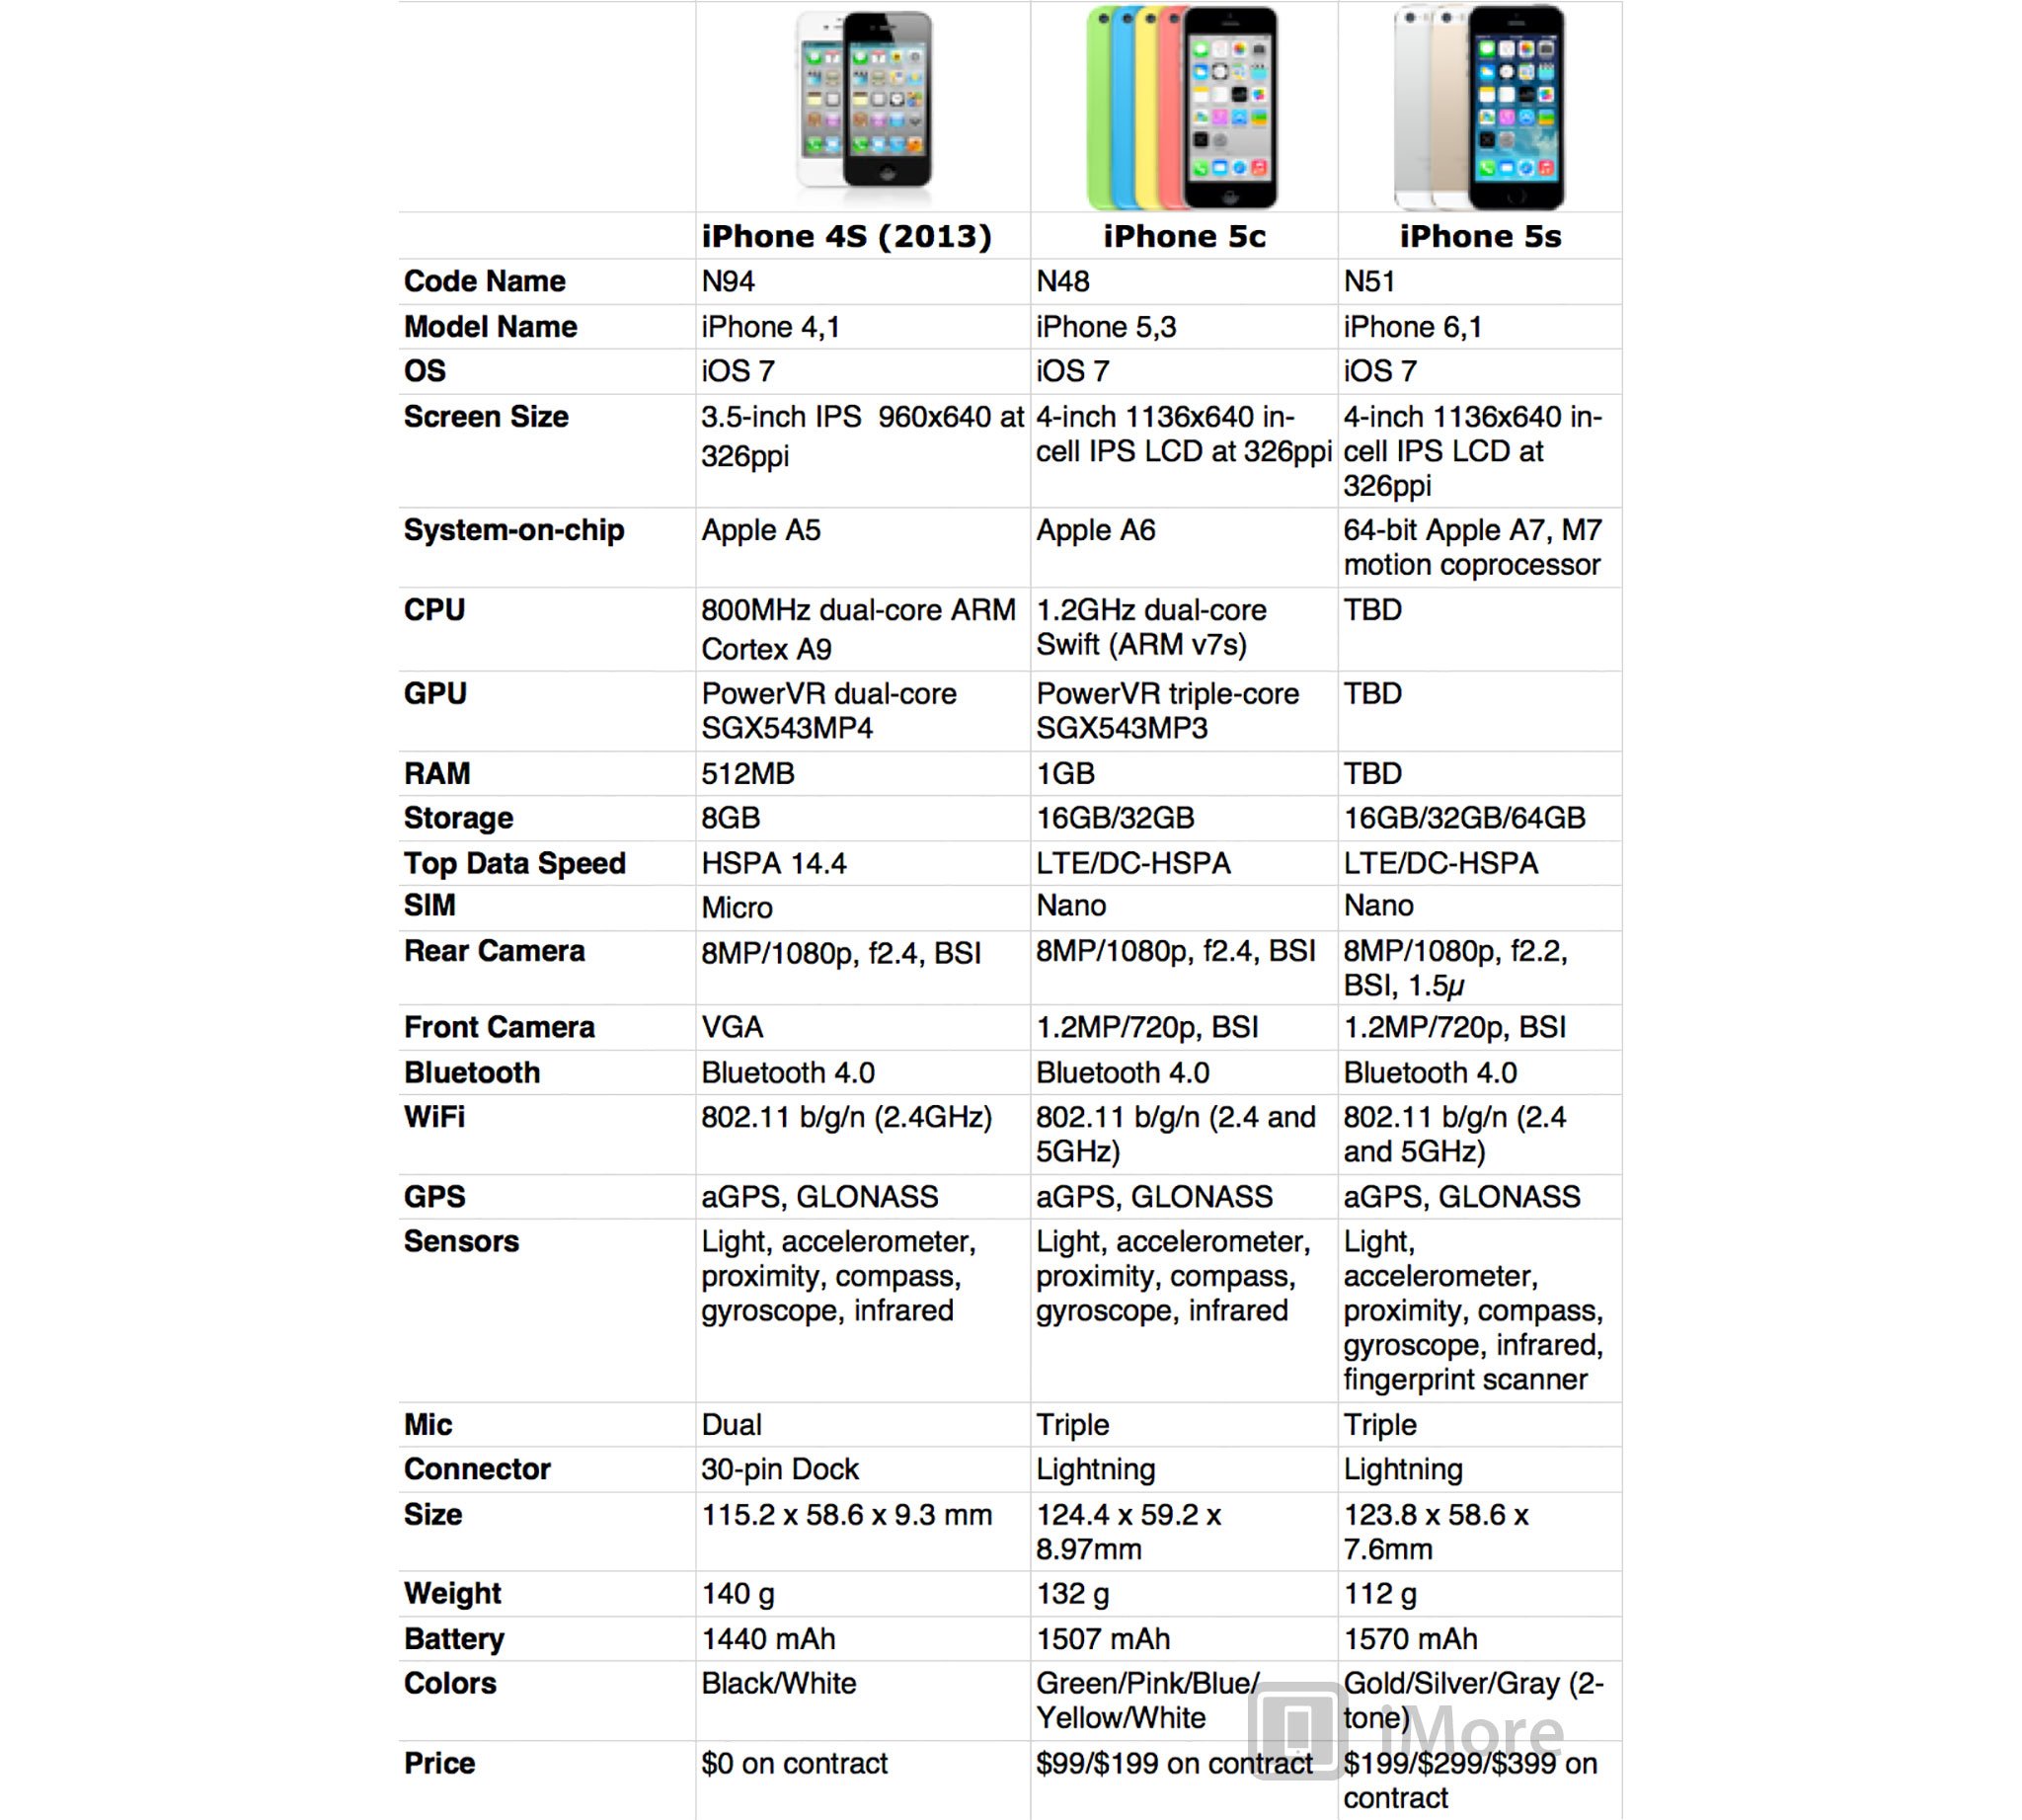 Iphone 5s Vs Iphone 5c Vs Iphone 4s Which Iphone Should You Get Imore